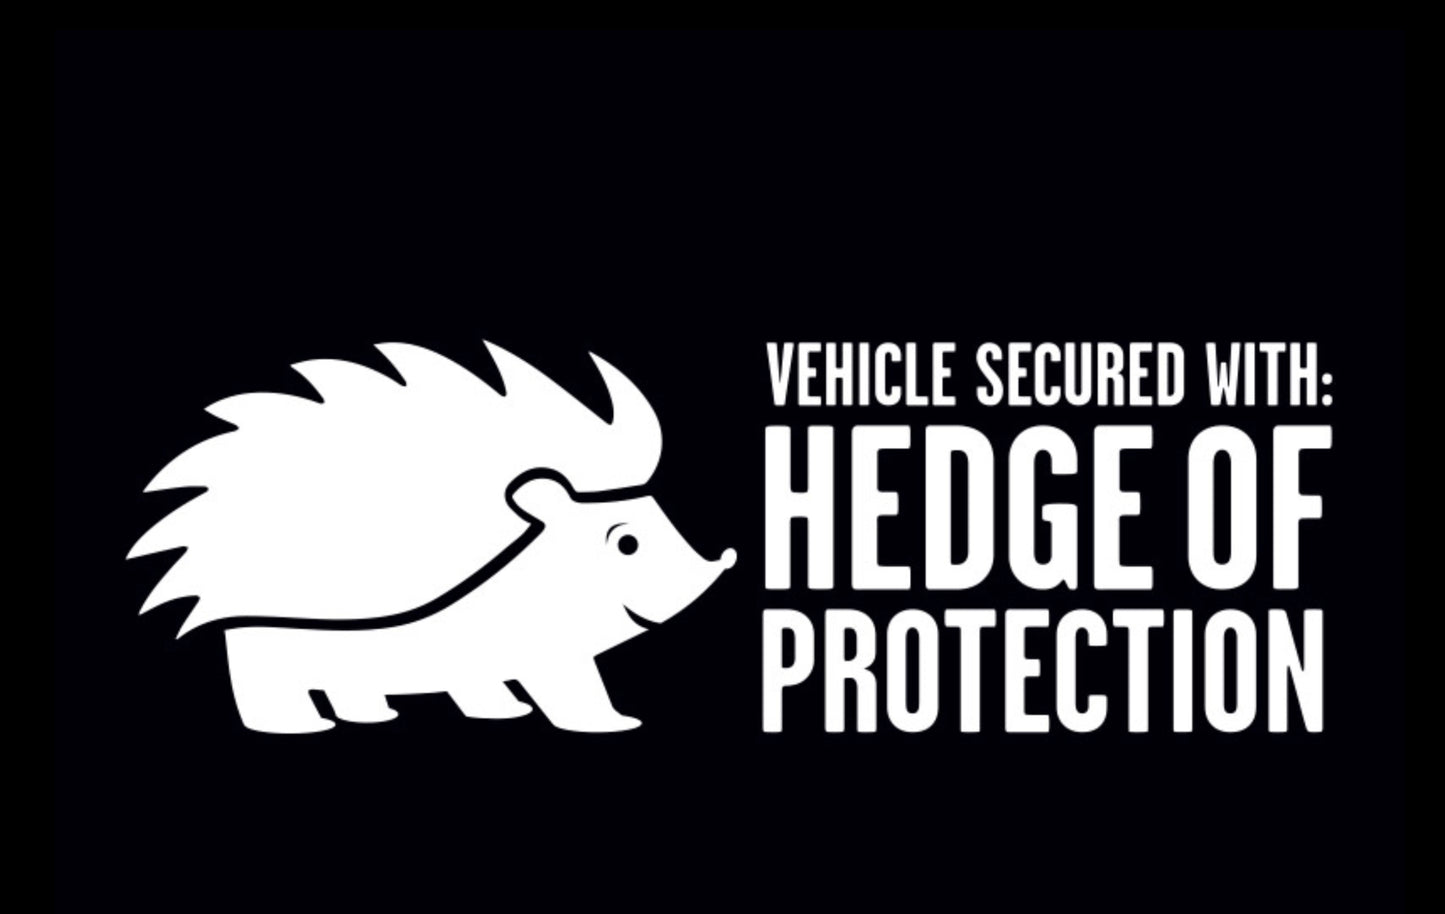 Multi-Purpose Decal Hedge of Protection White 2.5in x 8 in